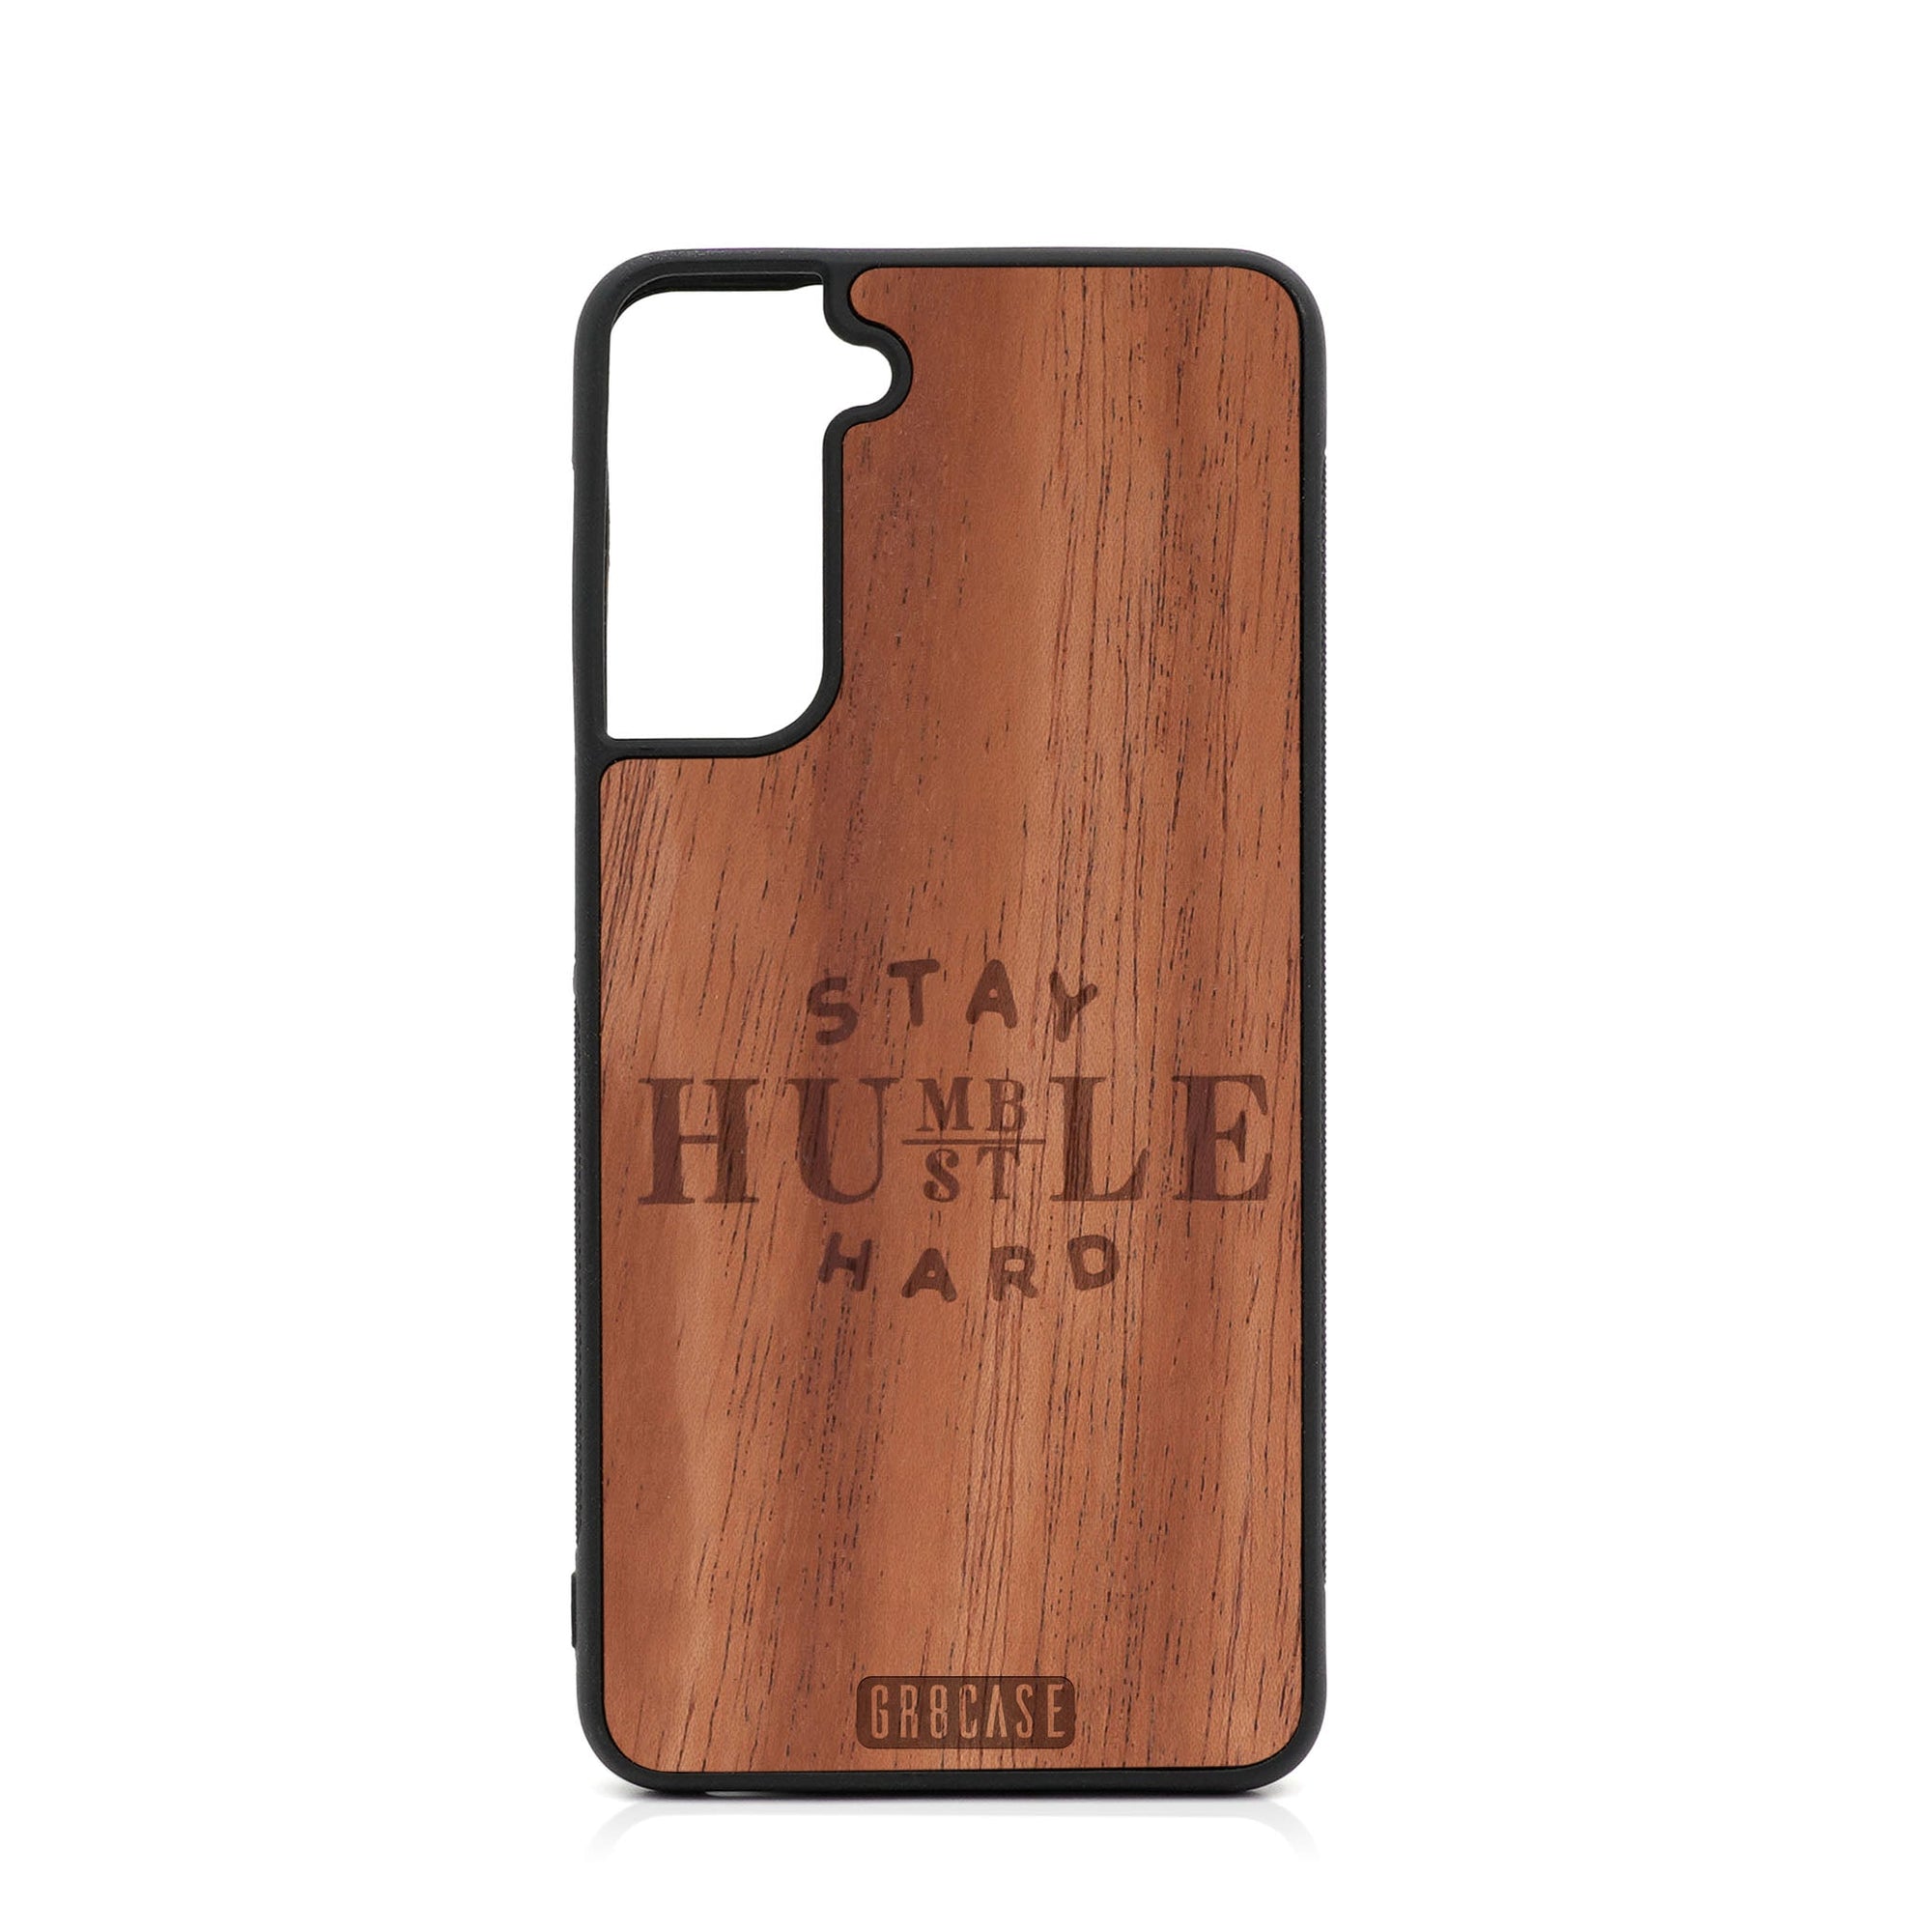 Stay Humble Hustle Hard Design Wood Case For Samsung Galaxy S21 FE 5G